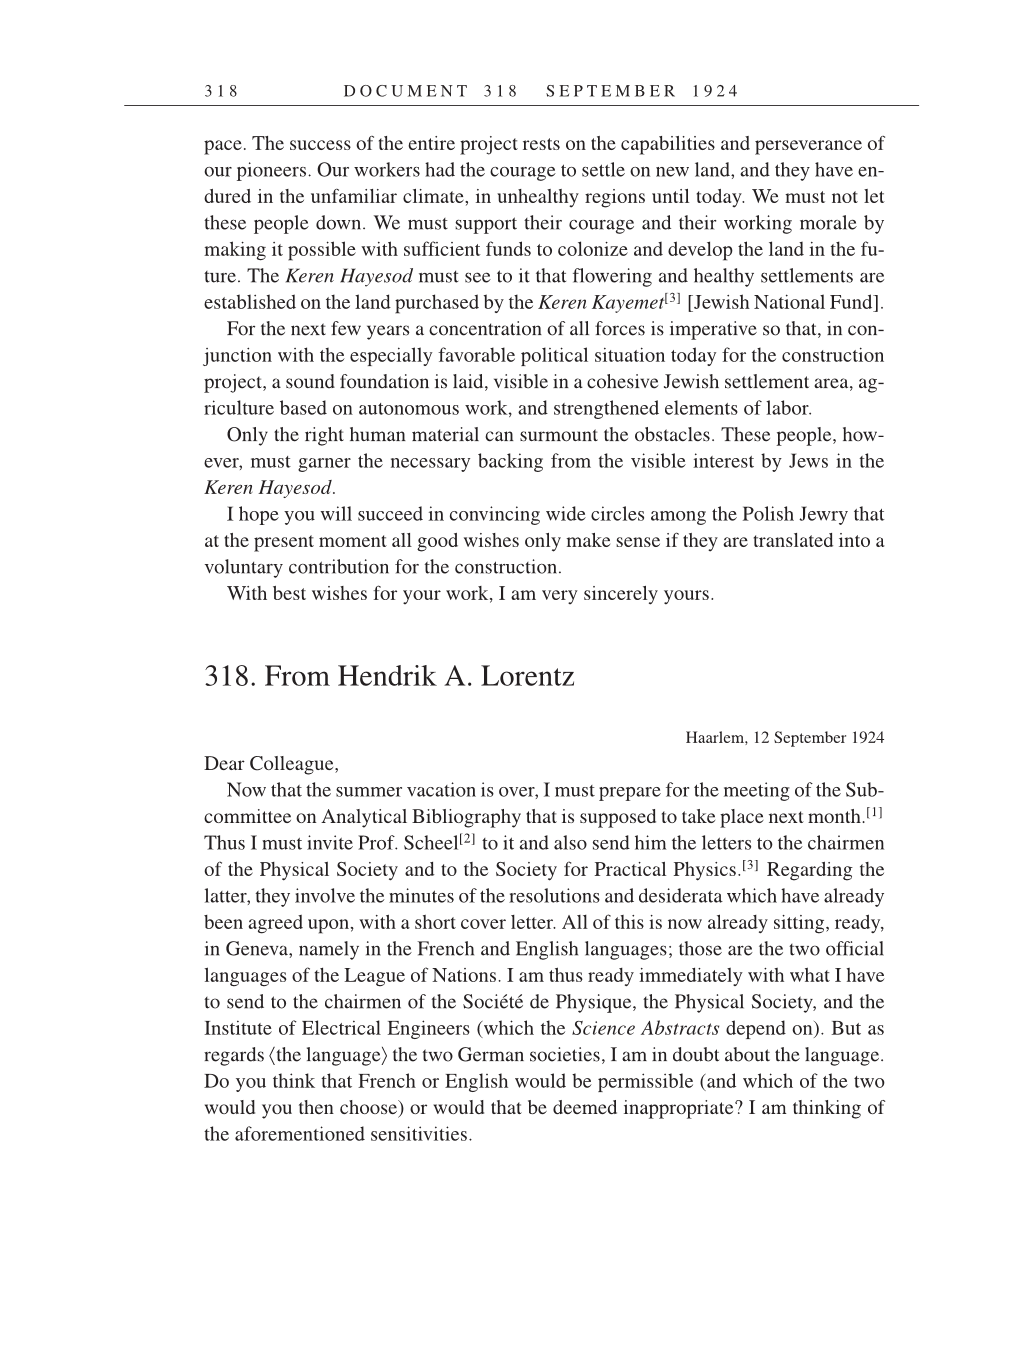 Volume 14: The Berlin Years: Writings & Correspondence, April 1923-May 1925 (English Translation Supplement) page 318